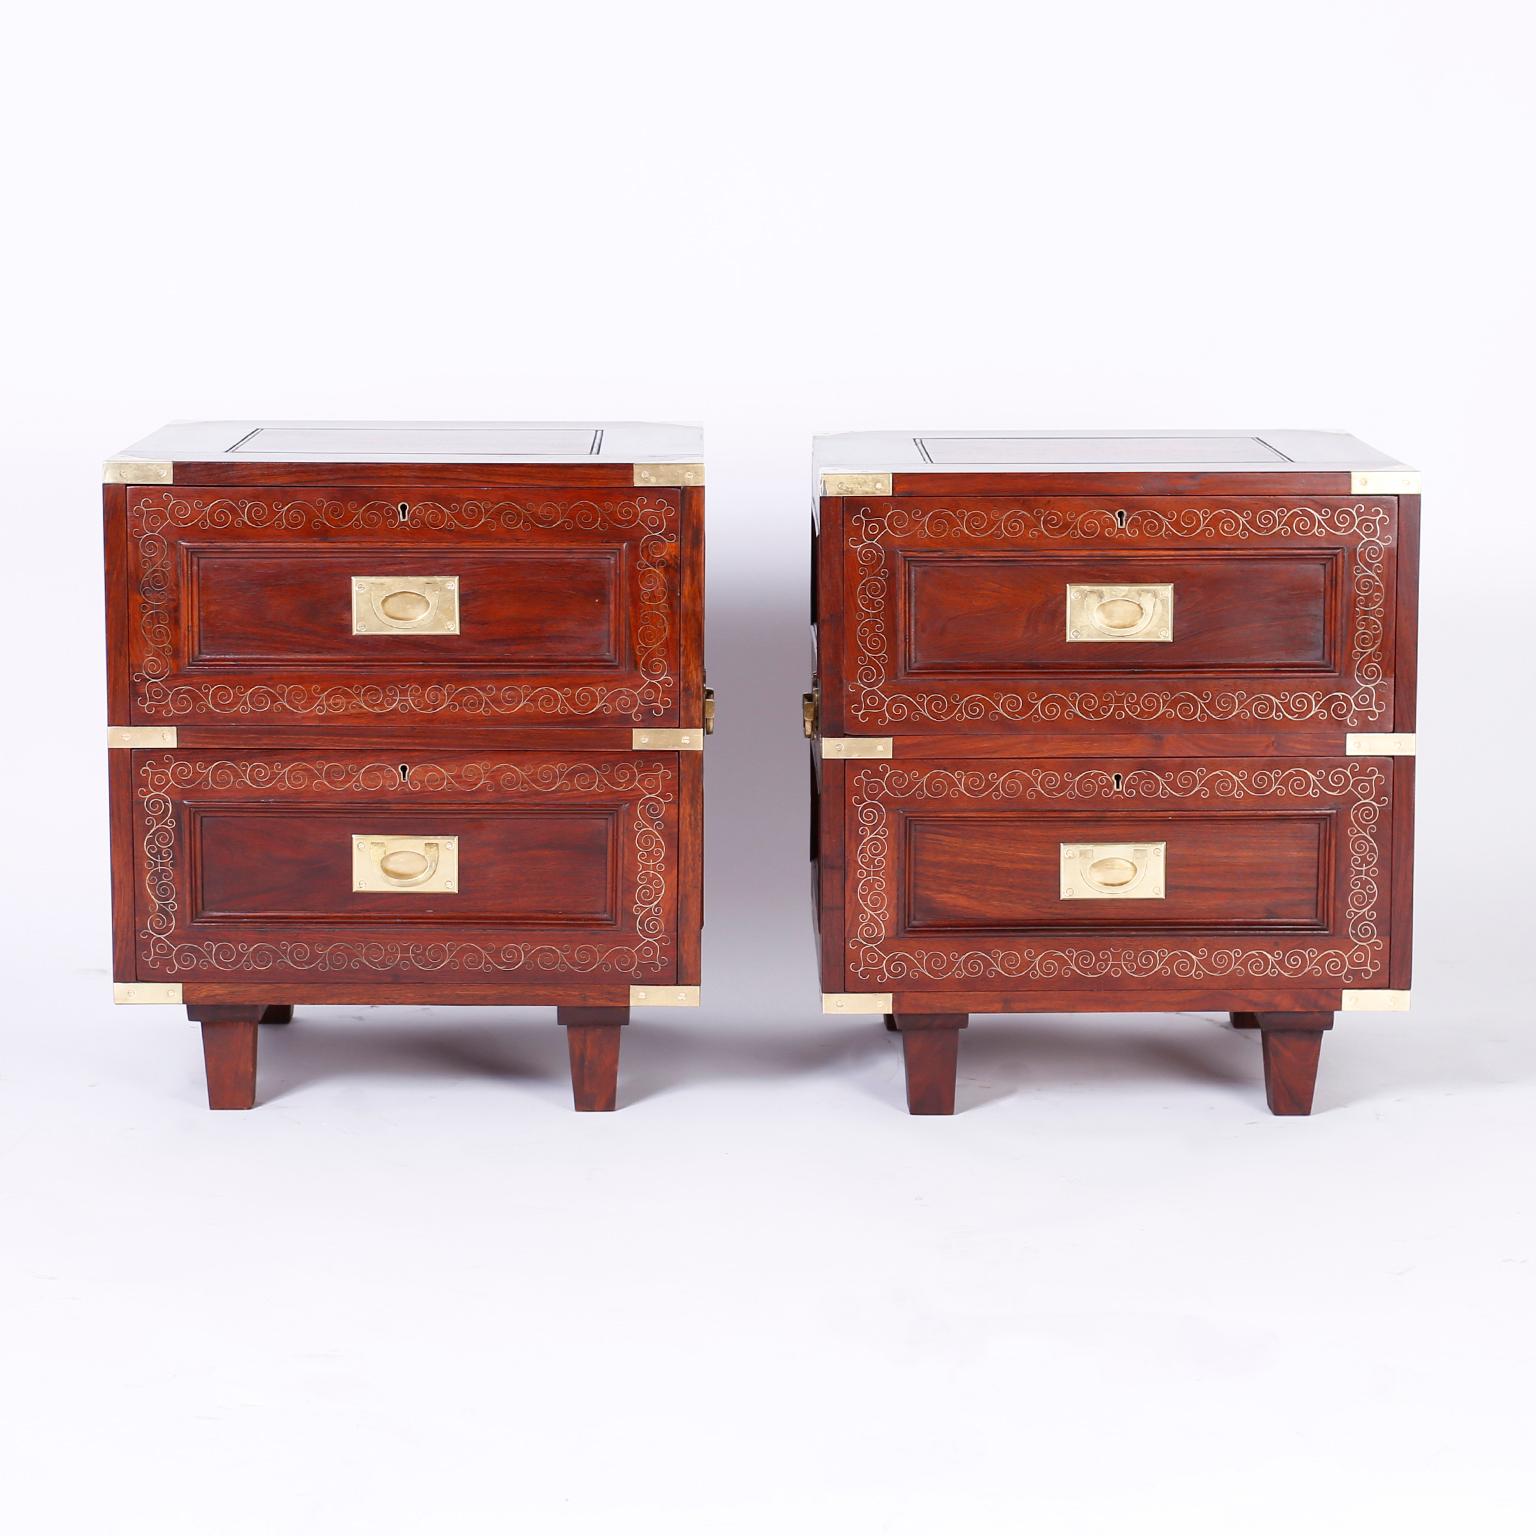 Refined pair of two-drawer Anglo Indian stands crafted in well grained rosewood with Campaign brass hardware, finished on all four sides, delicate brass string inlaid in floral design and tapered legs. Signed in a drawer M.Hayat & Bros LTD.